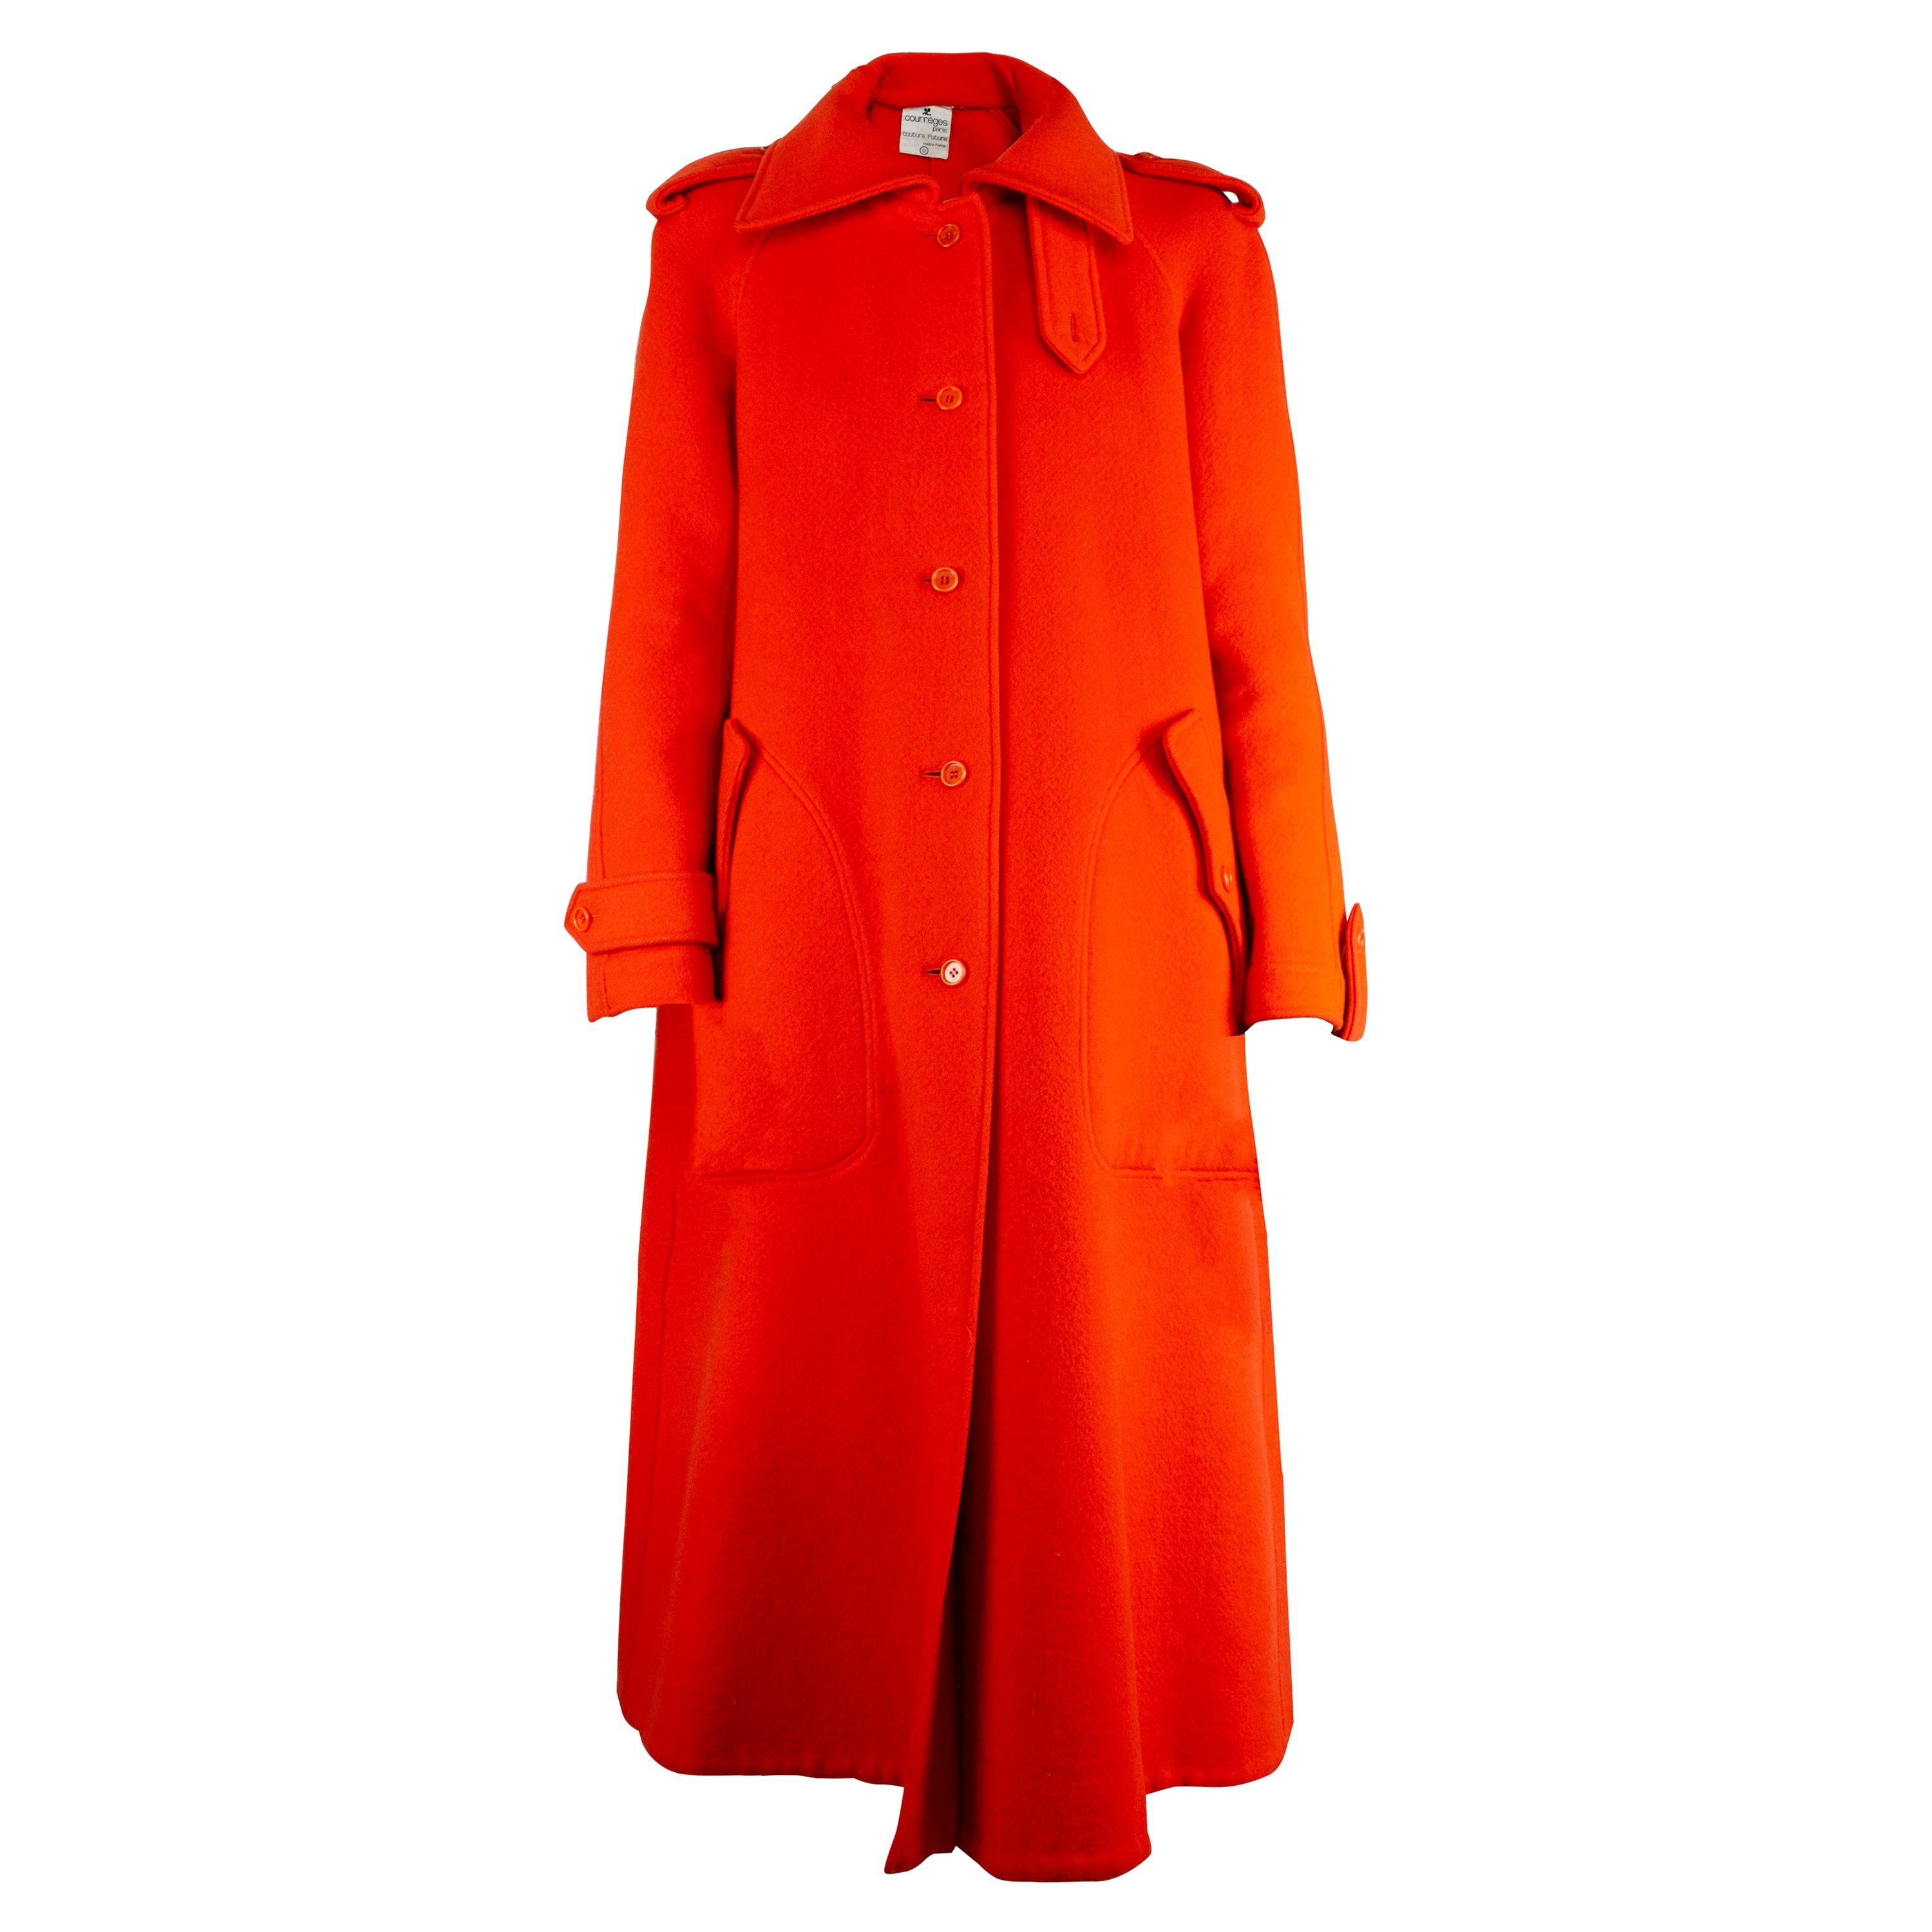  Courrèges Couture numbered military style wool coat. circa 1967